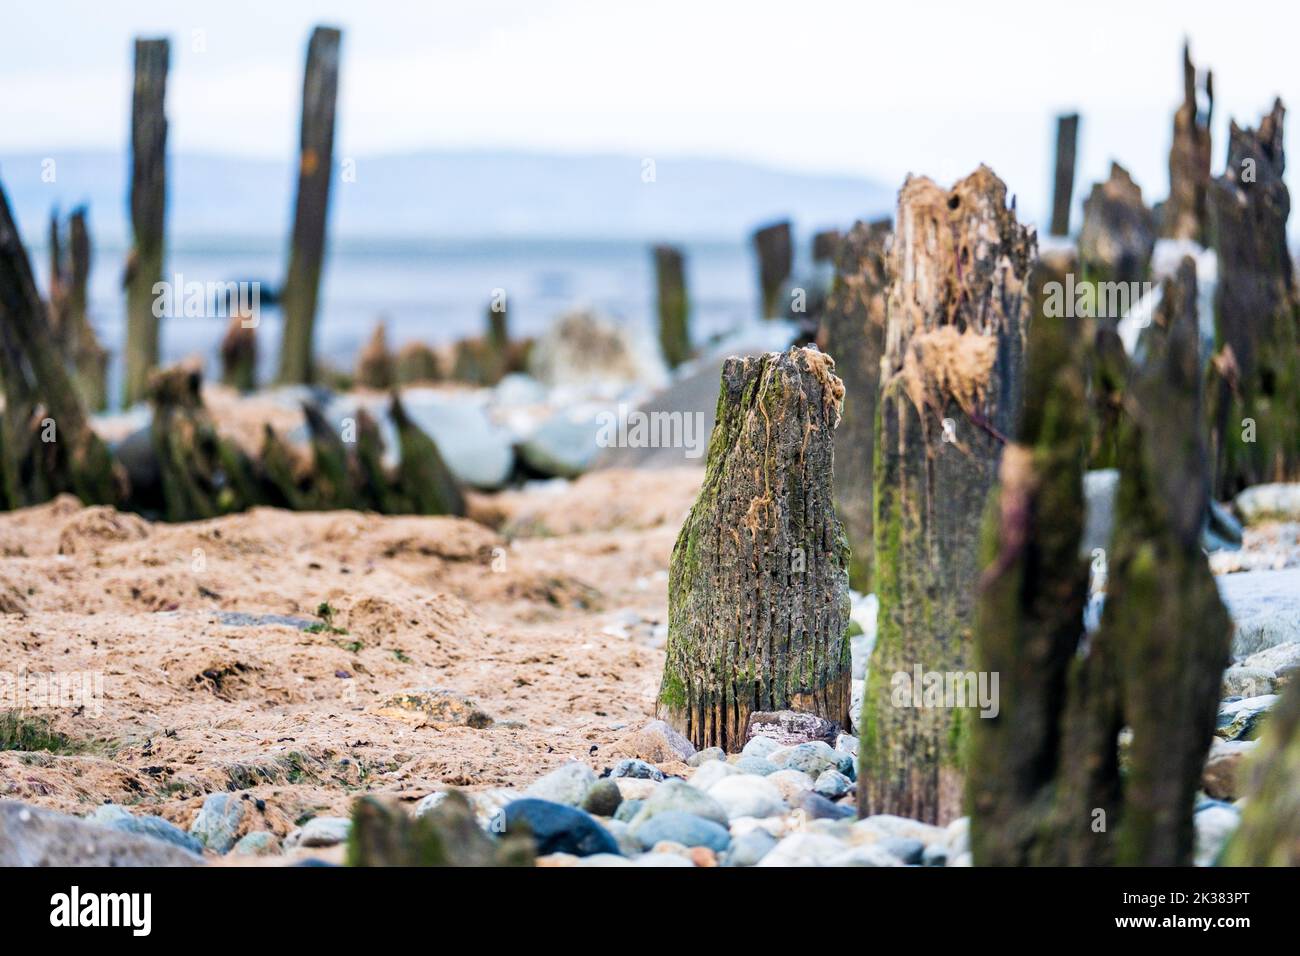 Decaying timbers from sea defenses on a beach in Wales Stock Photo